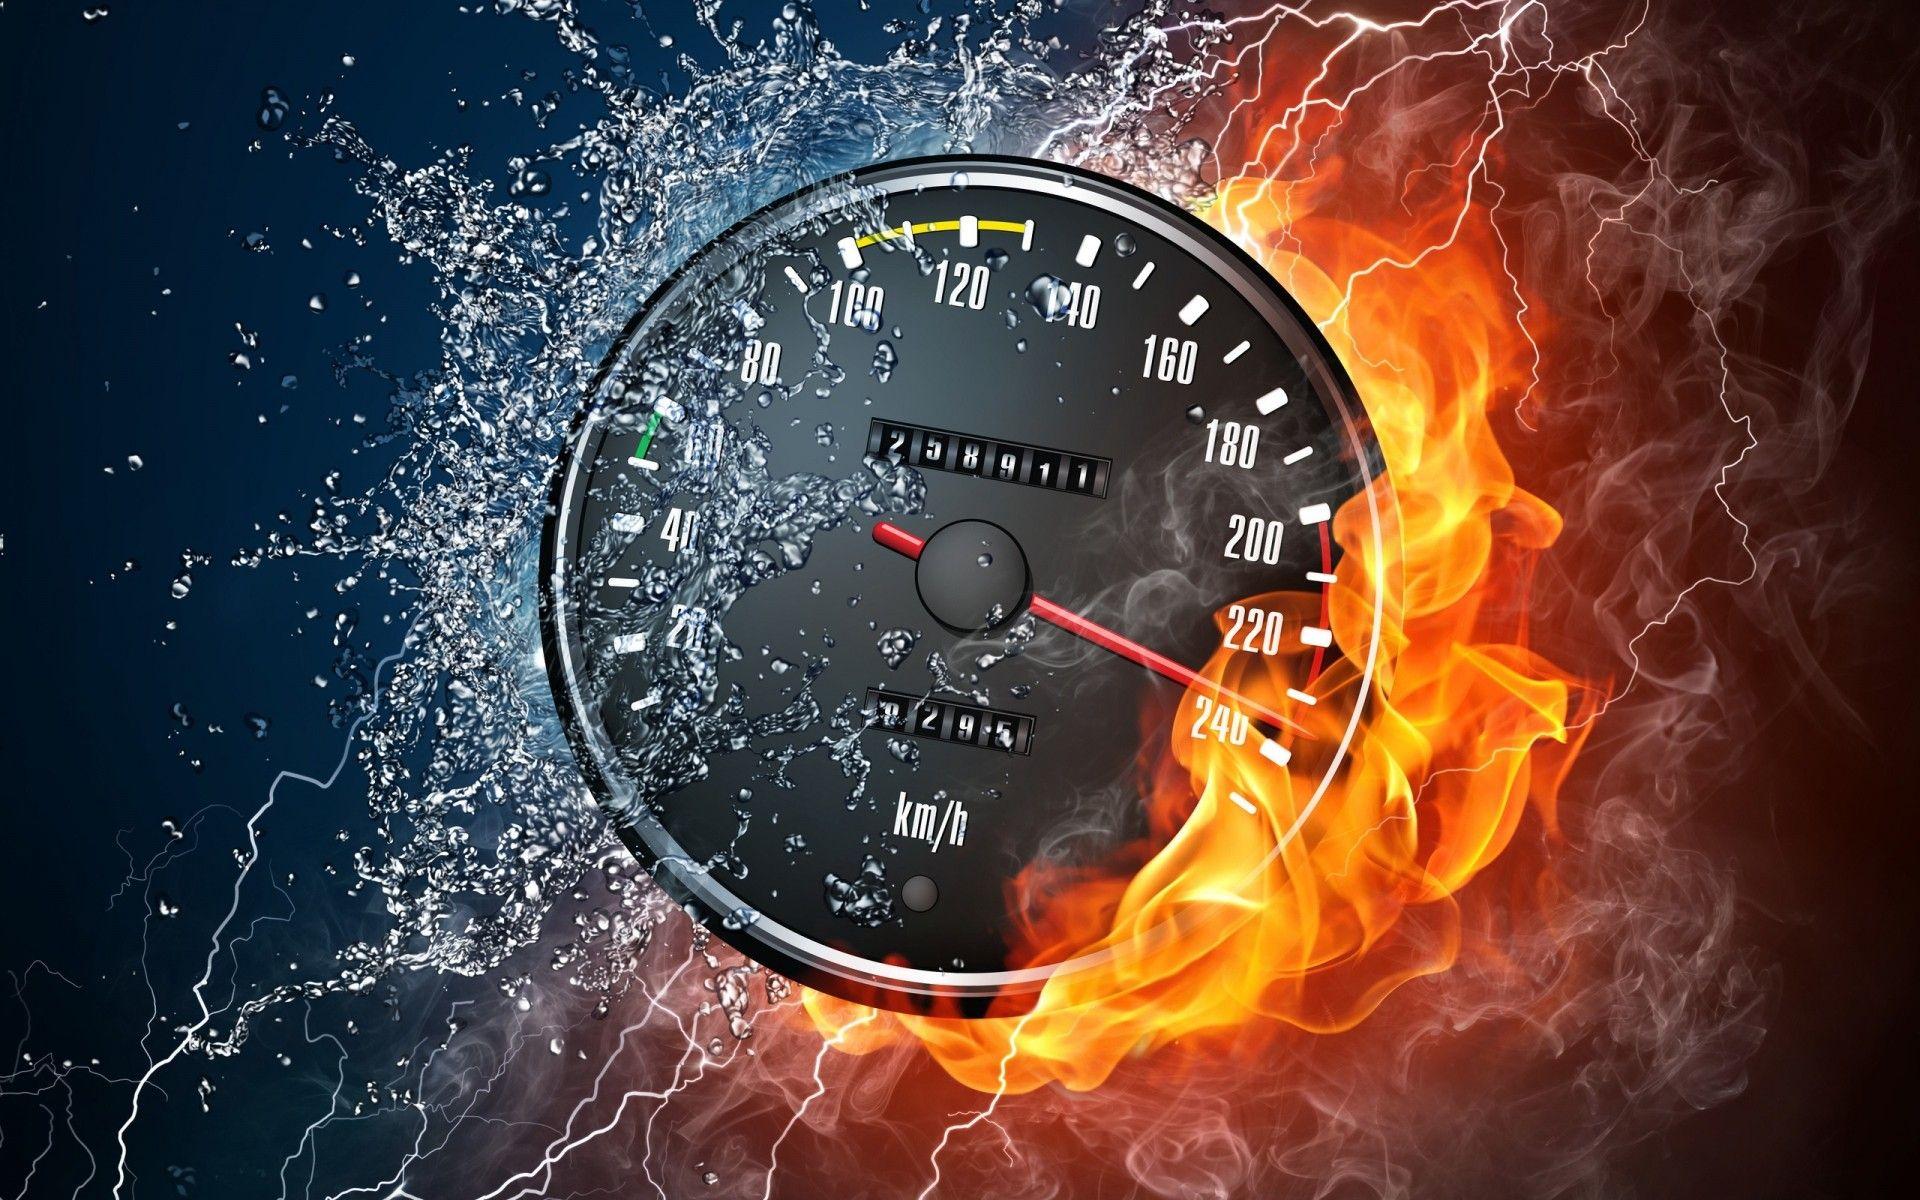 Clock Board in Fire. Android wallpaper for free